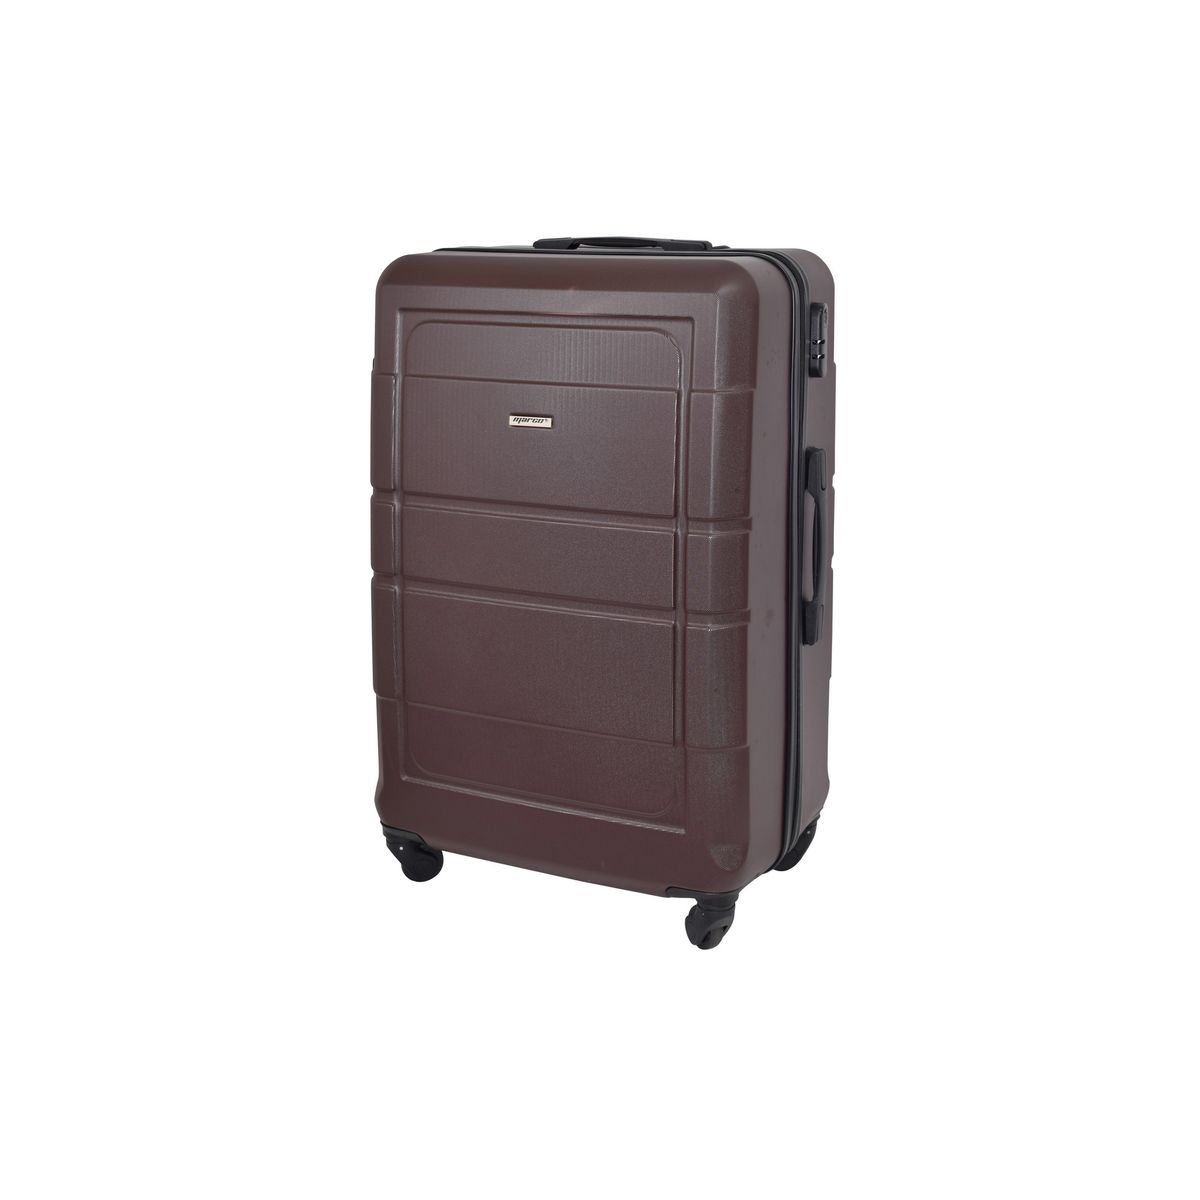 Marco Holiday Maker Luggage Bag - 20 inch - Brown